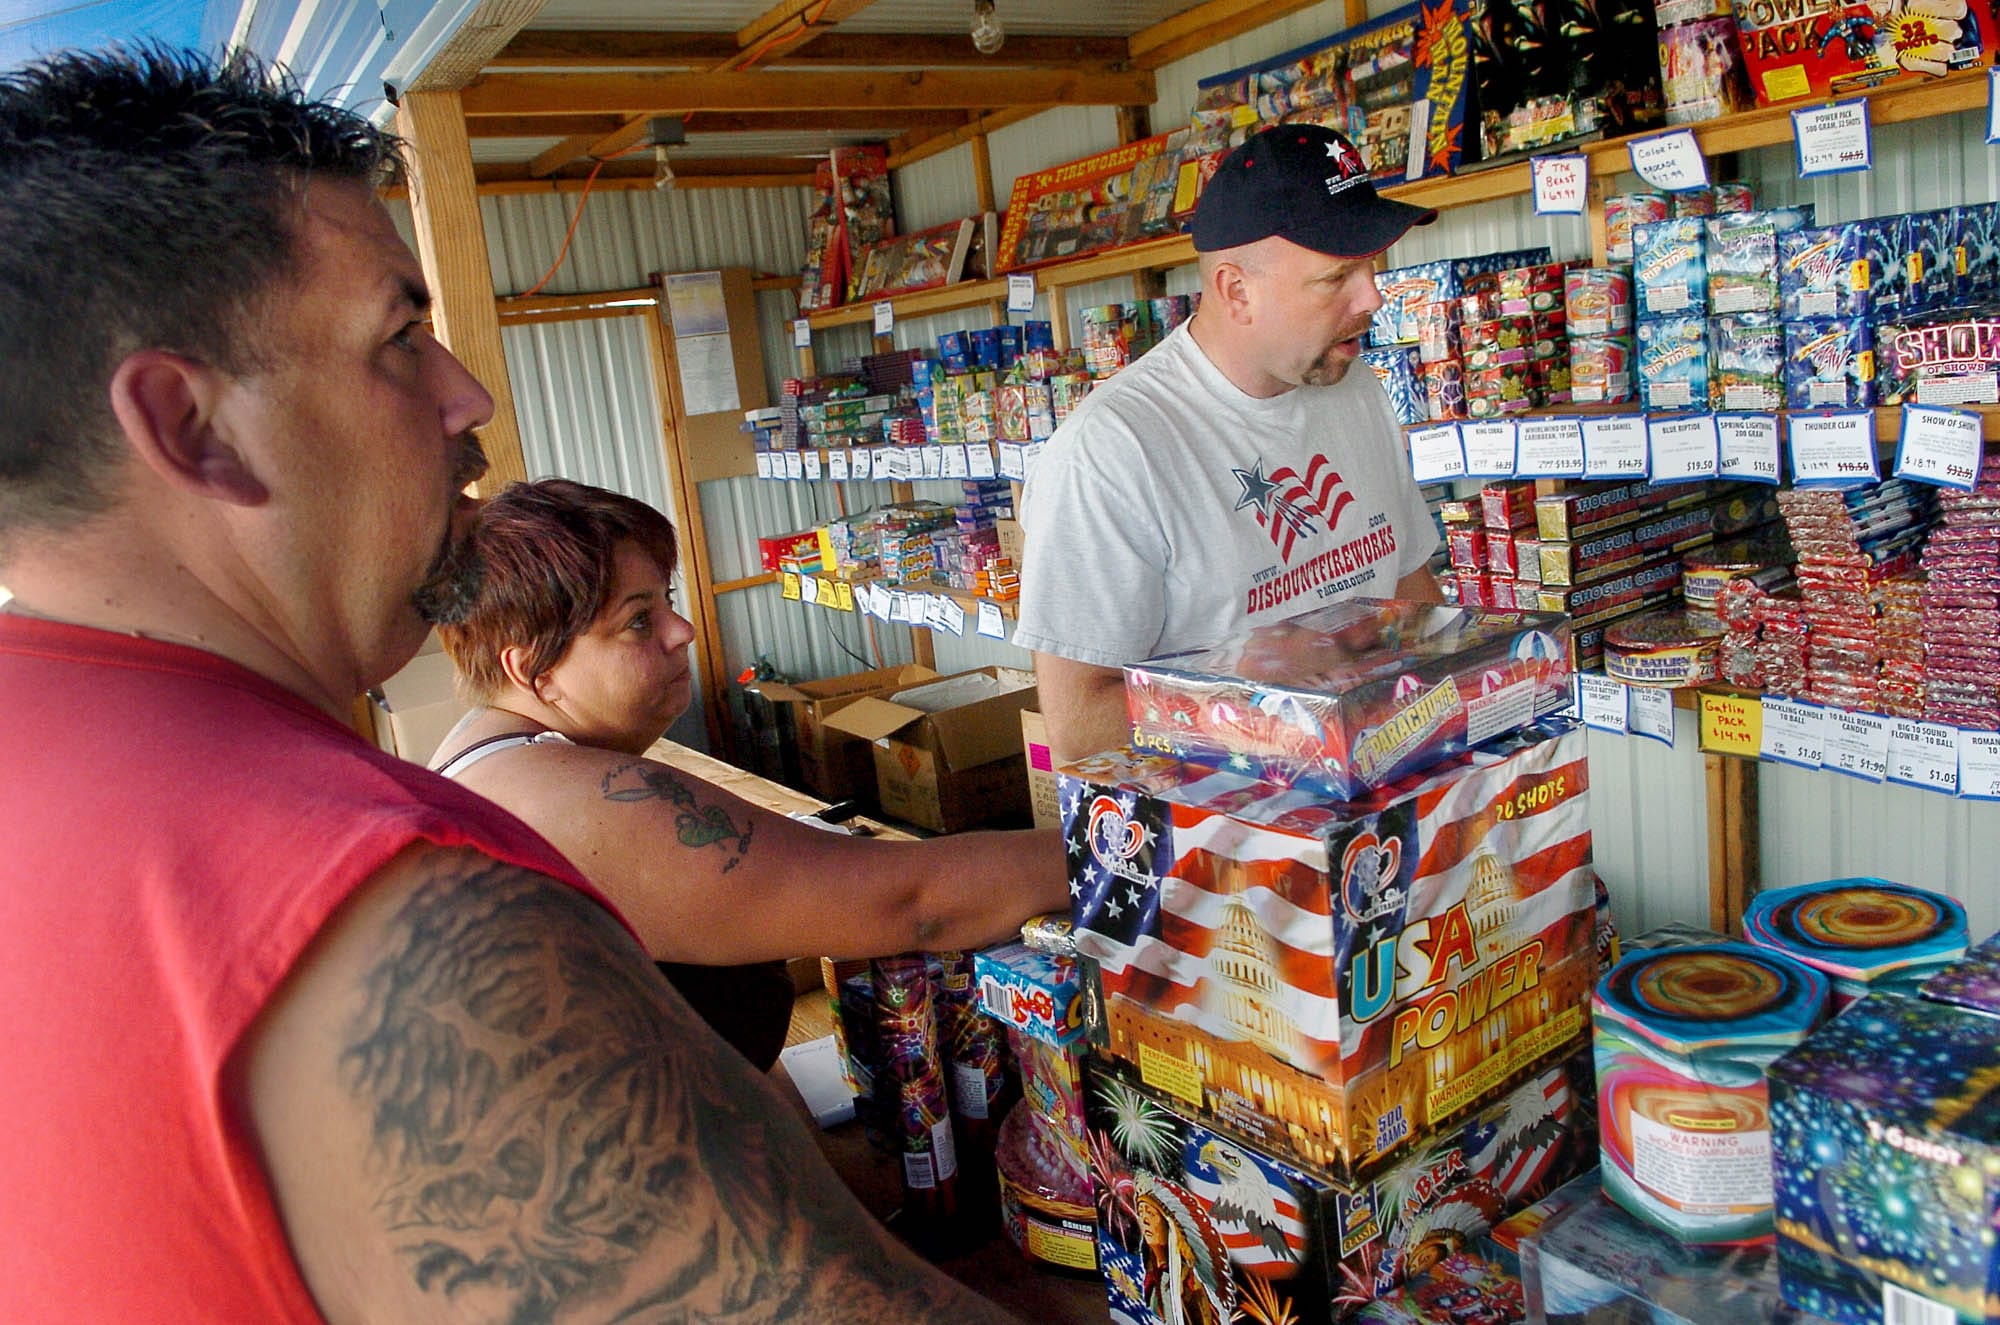 Bill and Twila Williams of La Center make their fireworks selections in 2007 as Lonnie McCann of Discount Fireworks assists at the stand located near the Clark County Fairgrounds. Clark County residents have the opportunity this election to vote on up to six nonbinding questions proposed by Clark County commissioners.